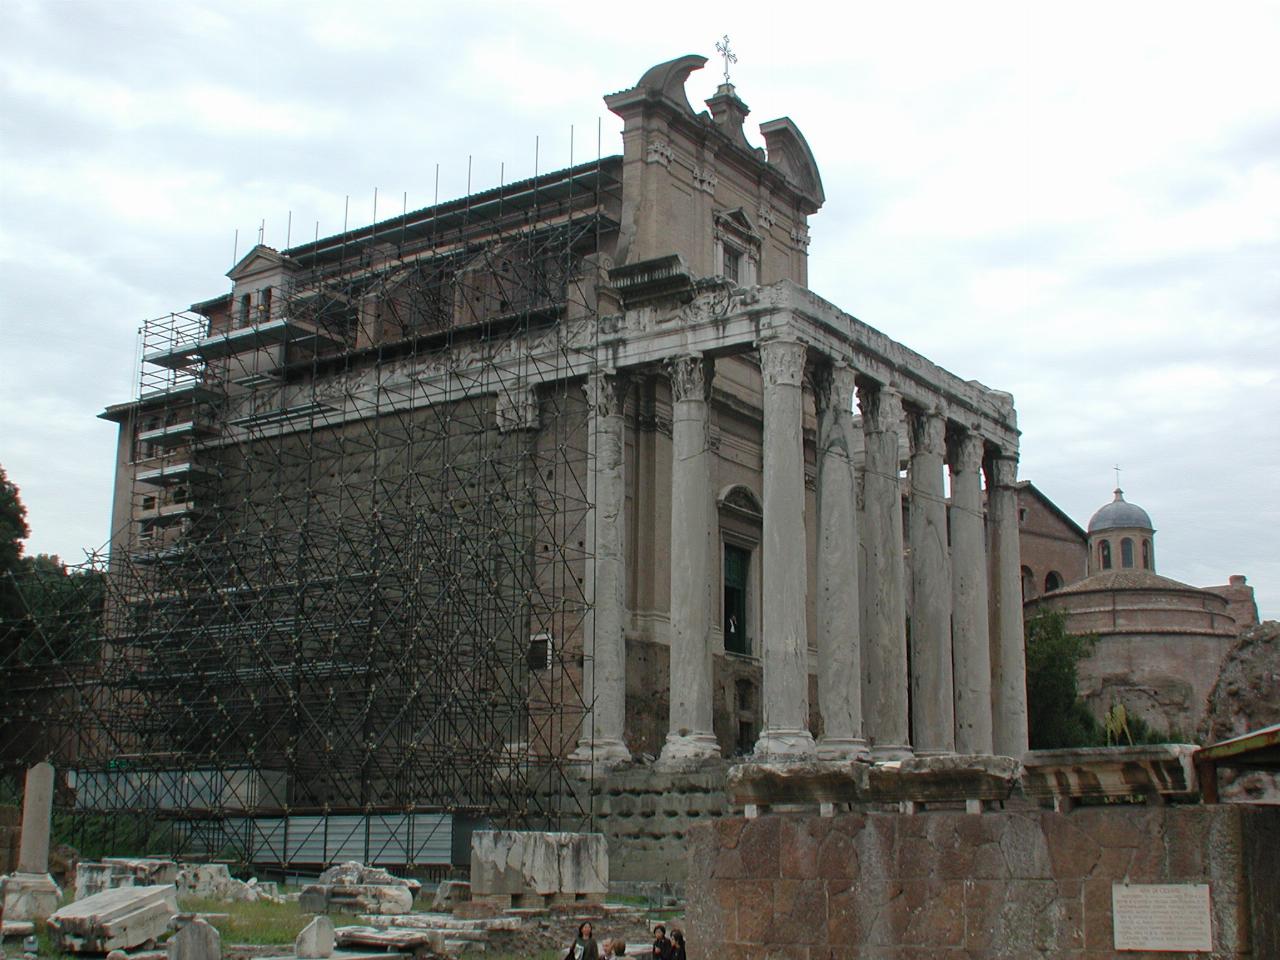 Temple of Antoninus and Faustina undergoing preservation